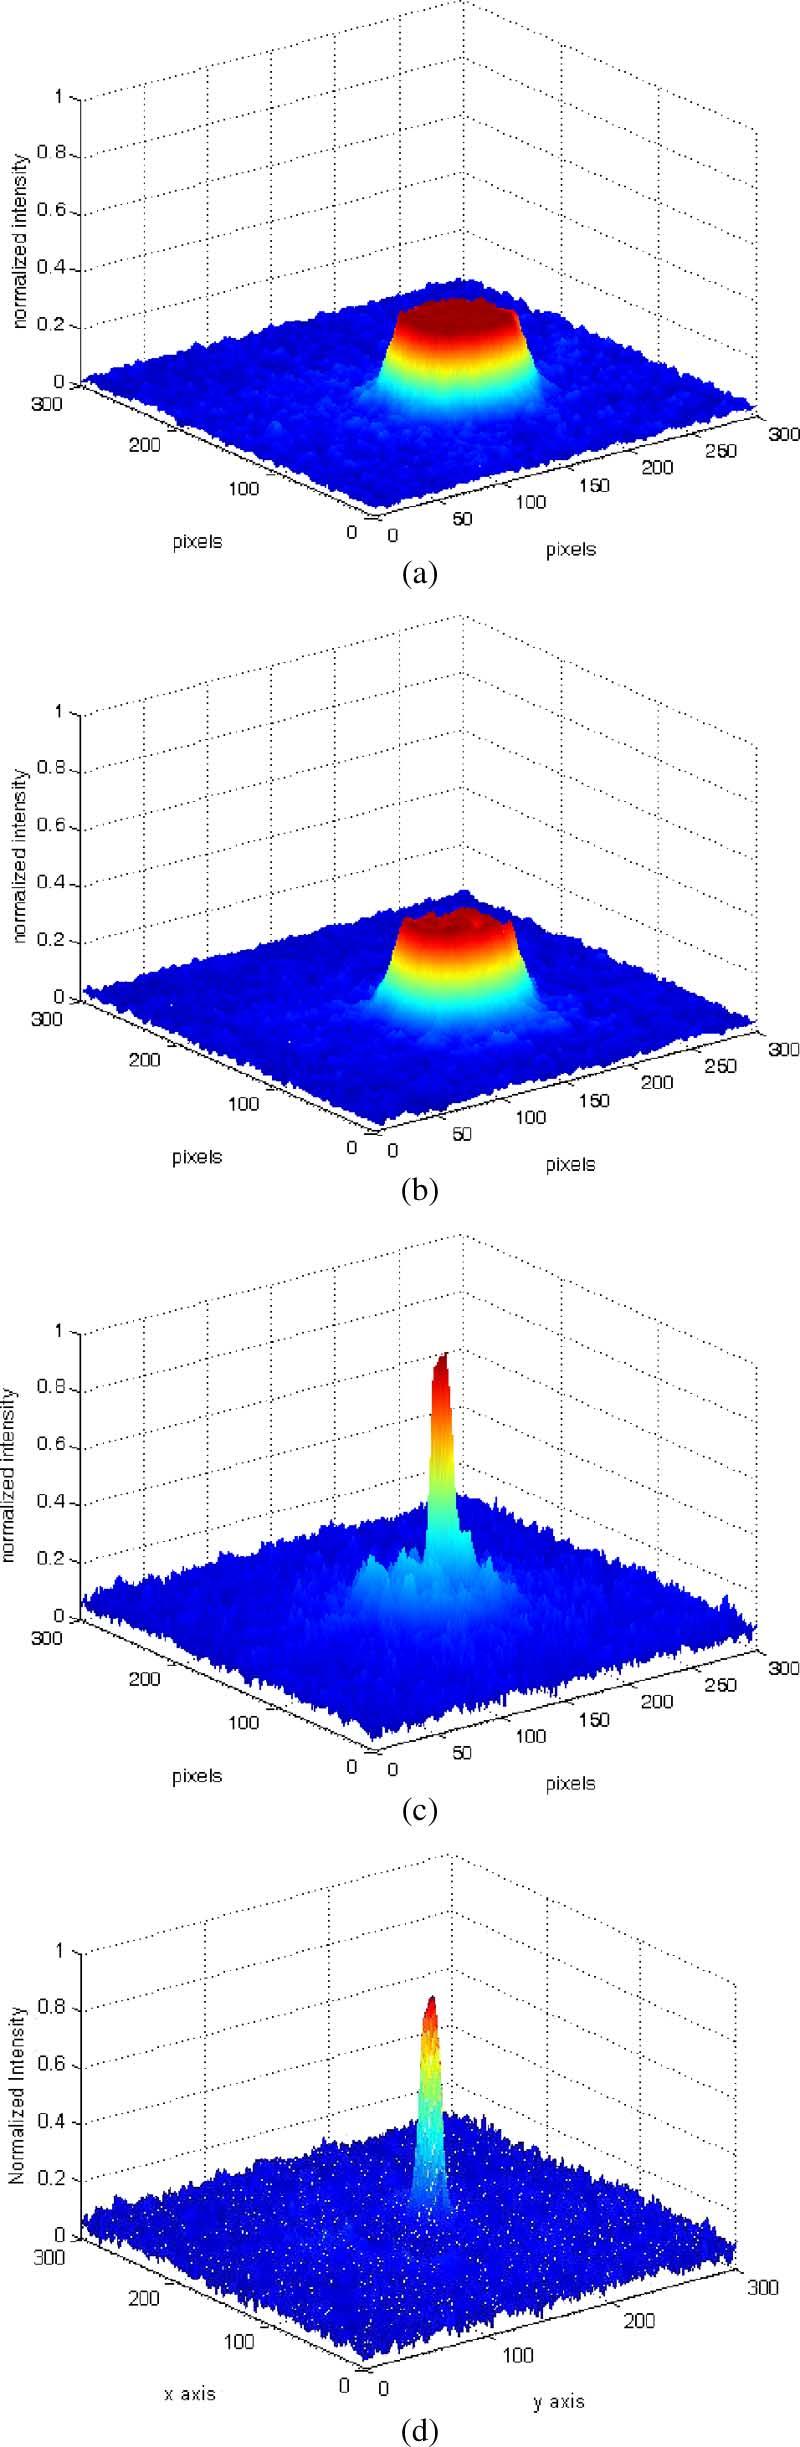 5(a) and 5(c) is extended. Fig. 6 shows the light intensity distribution of focal plane and the simulation result. Fig. 7 shows the measured diffraction efficiency (the red dots) as a function of the applied voltage (the blue dashed line).